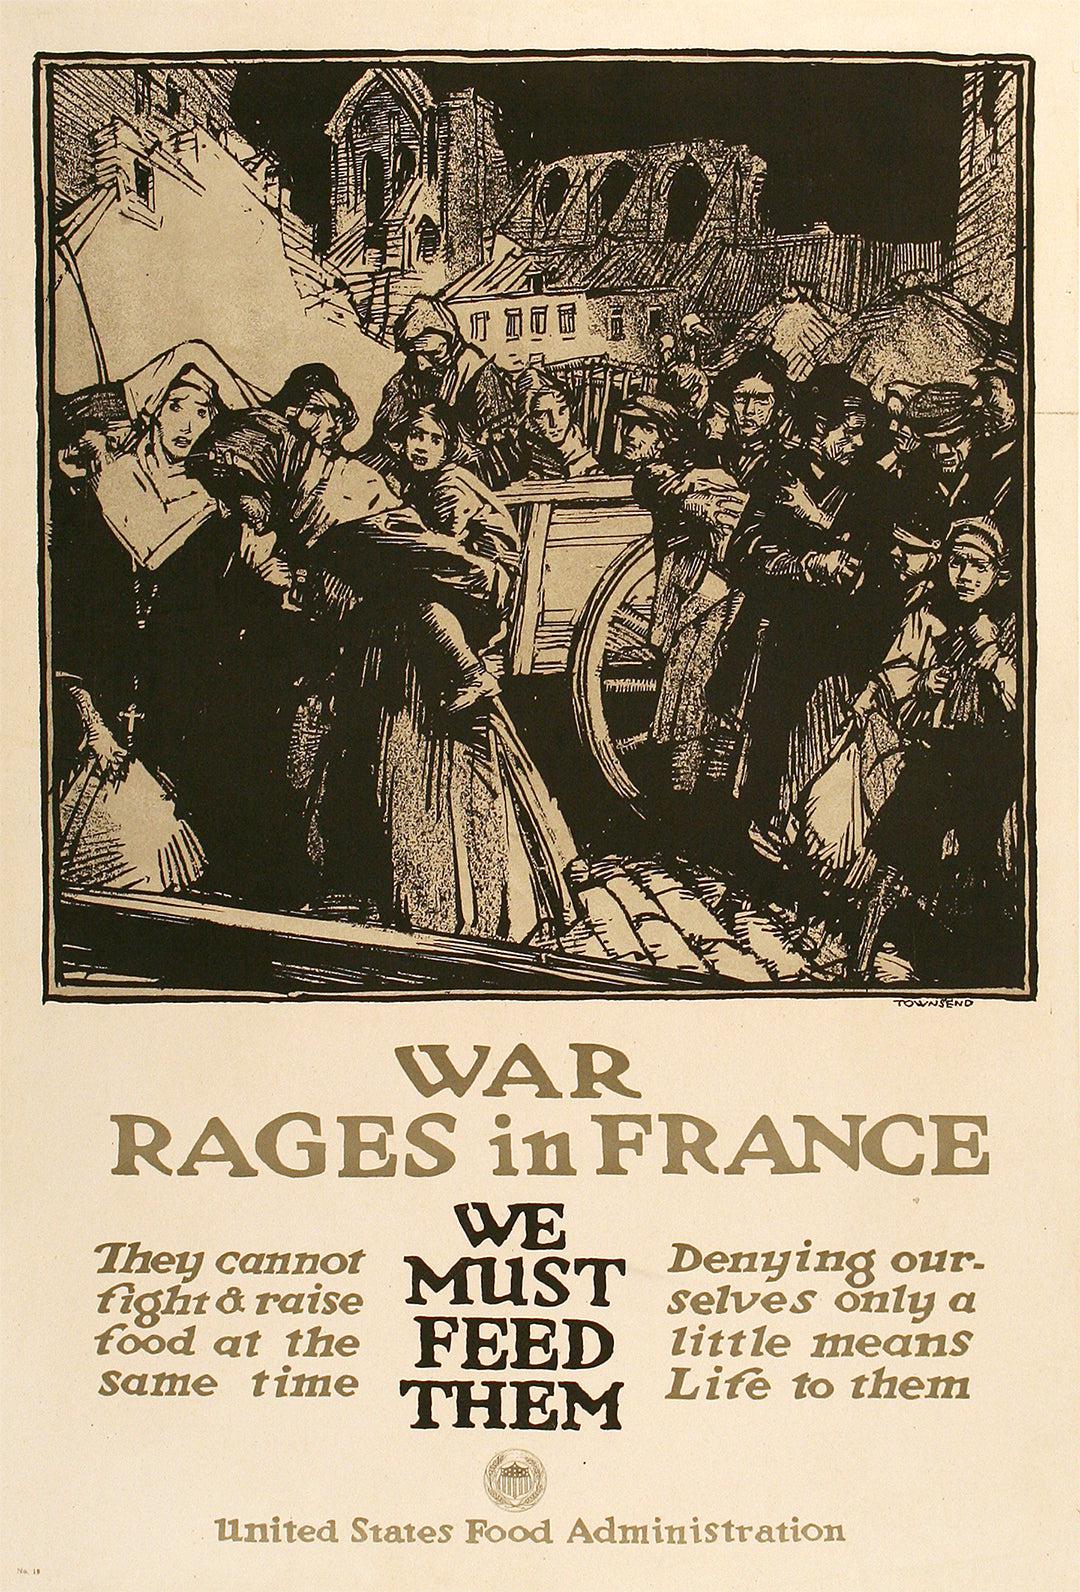 Original Vintage WWI War Rages in France Poster by Townsend c1917